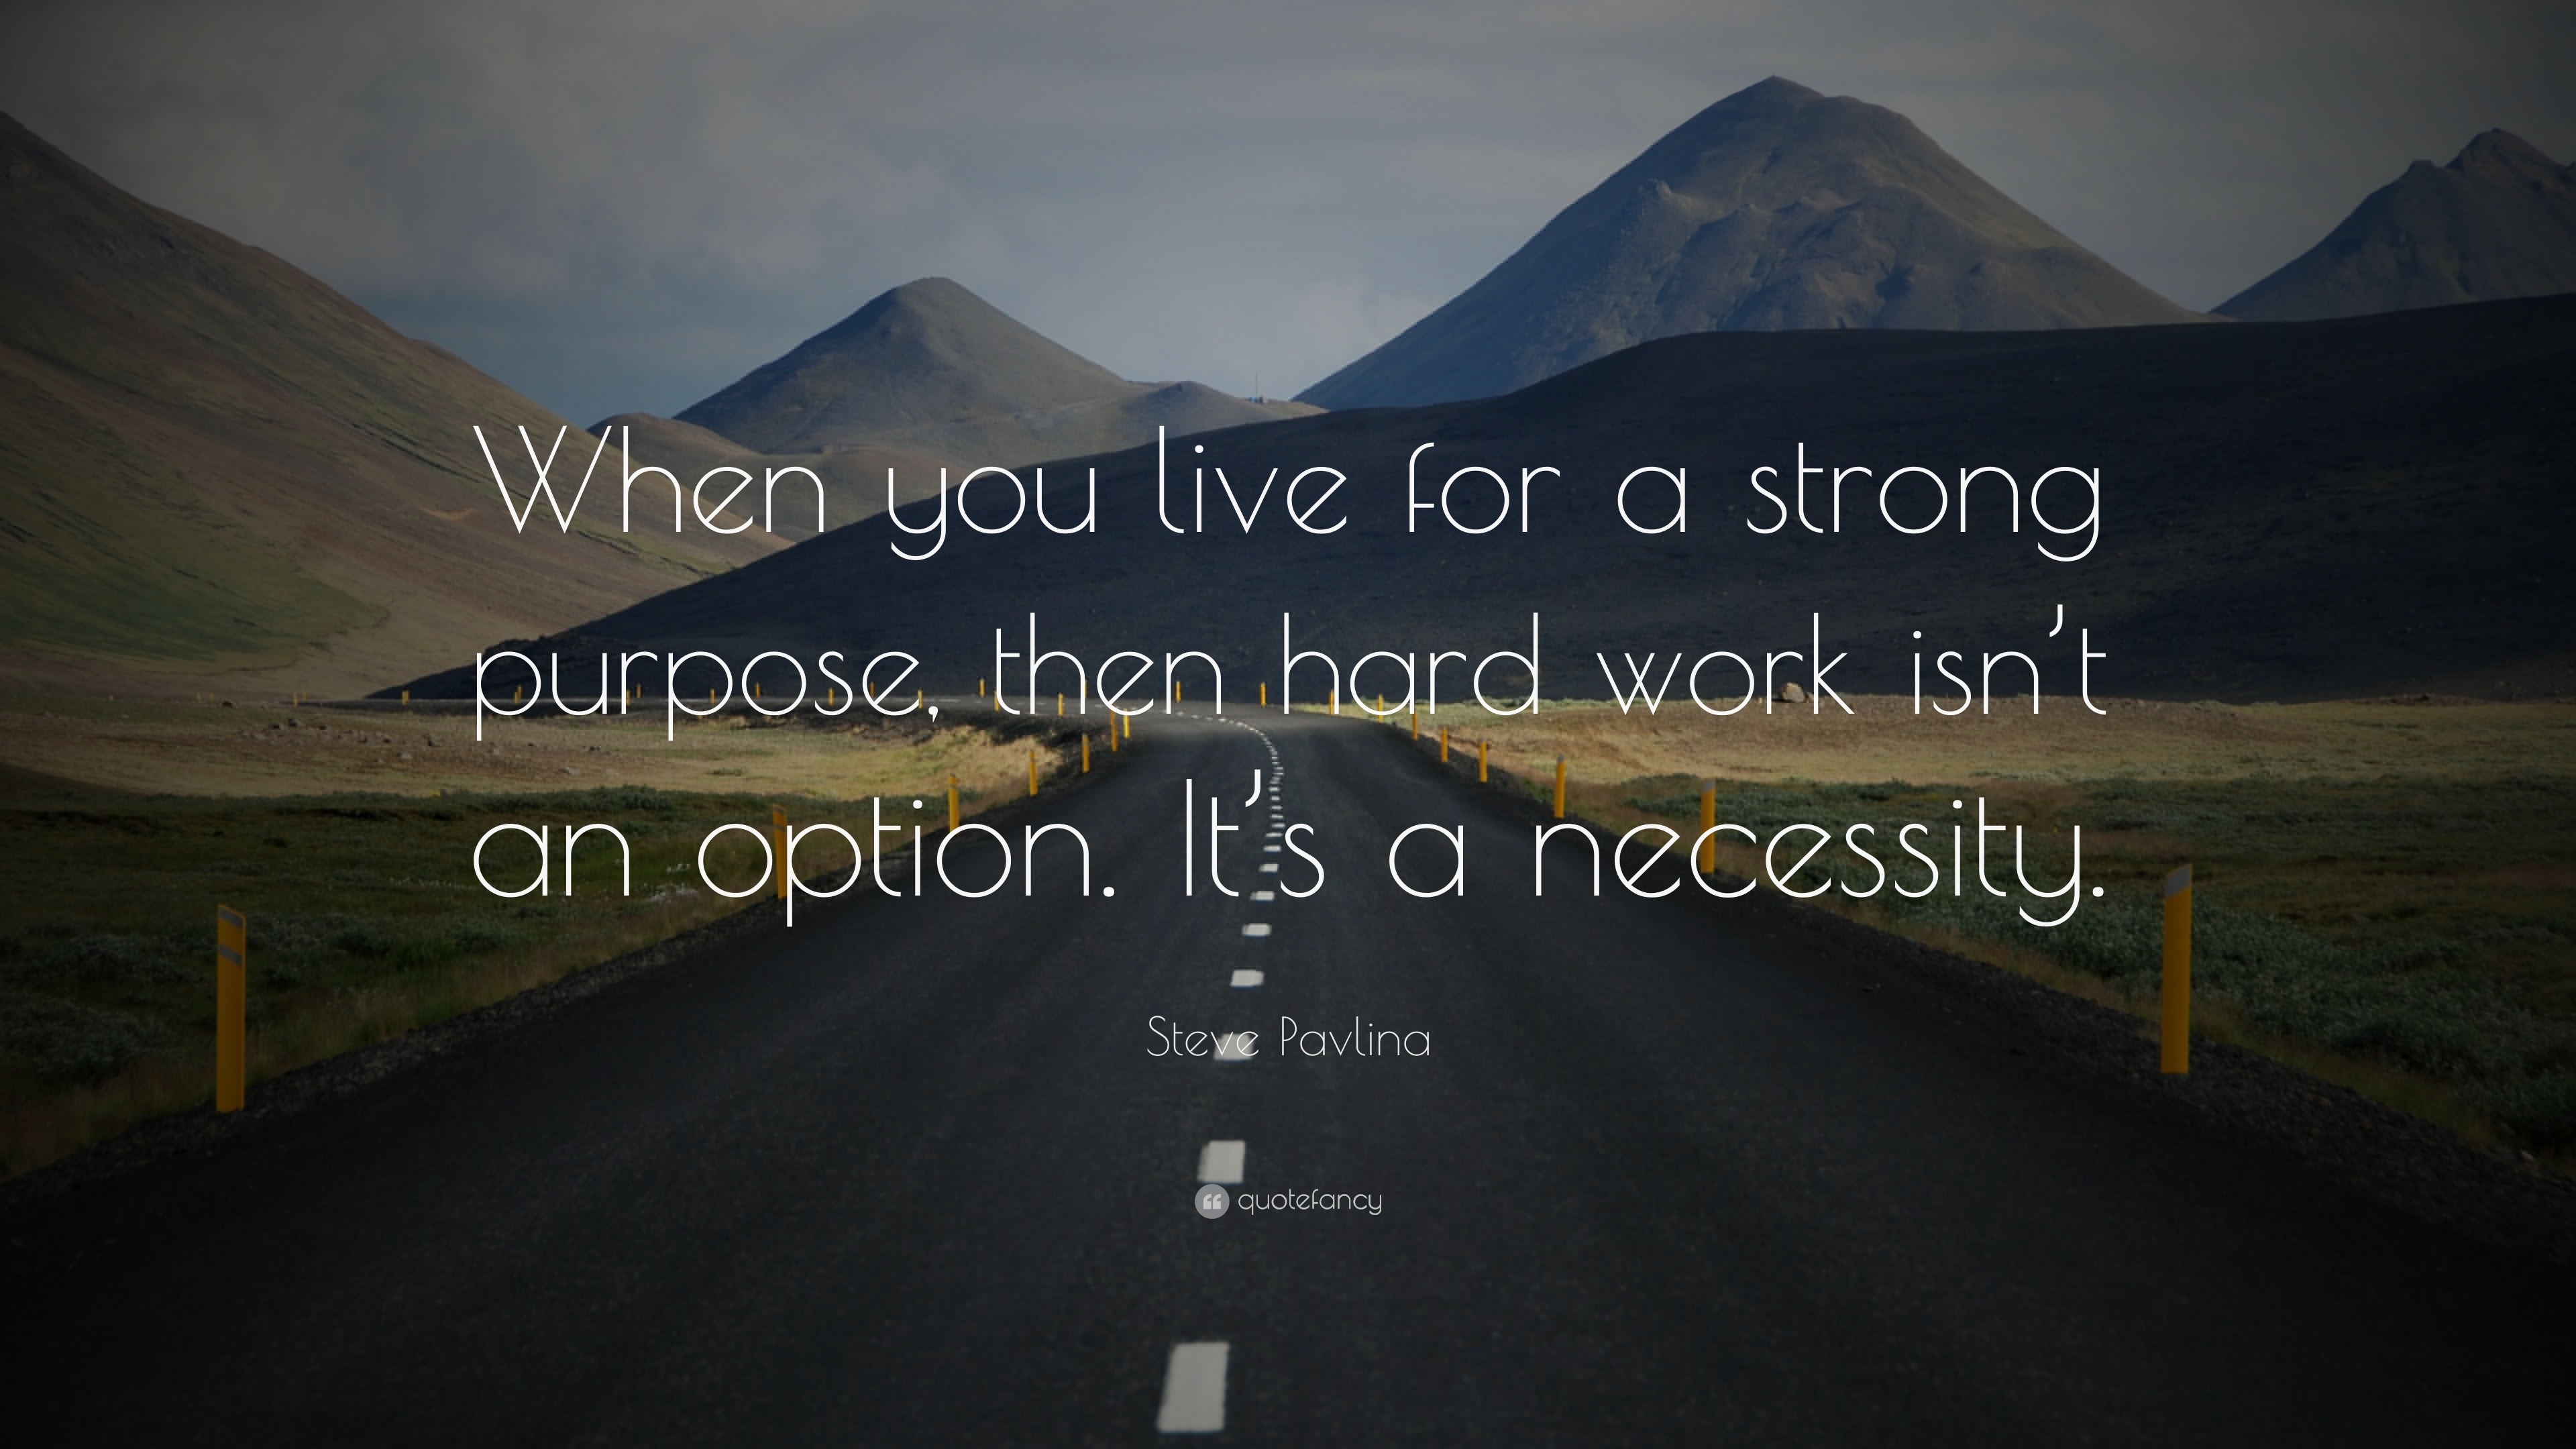 When you live for a strong purpose, then hard work isn’t an option. 